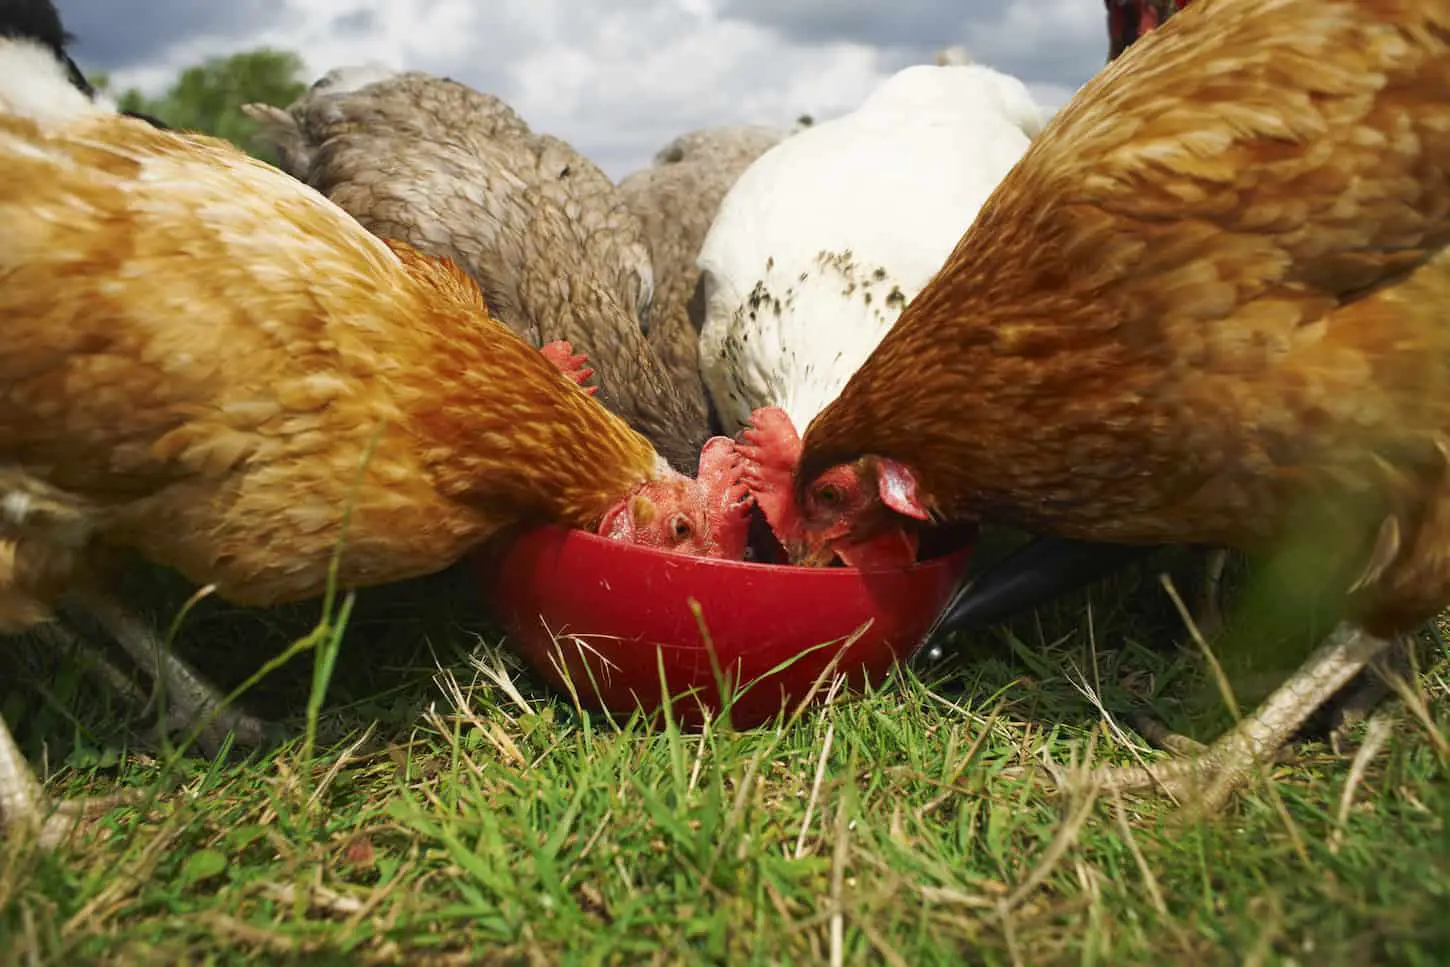 An image of free-range chickens feeding in a shared bowl on the grass.